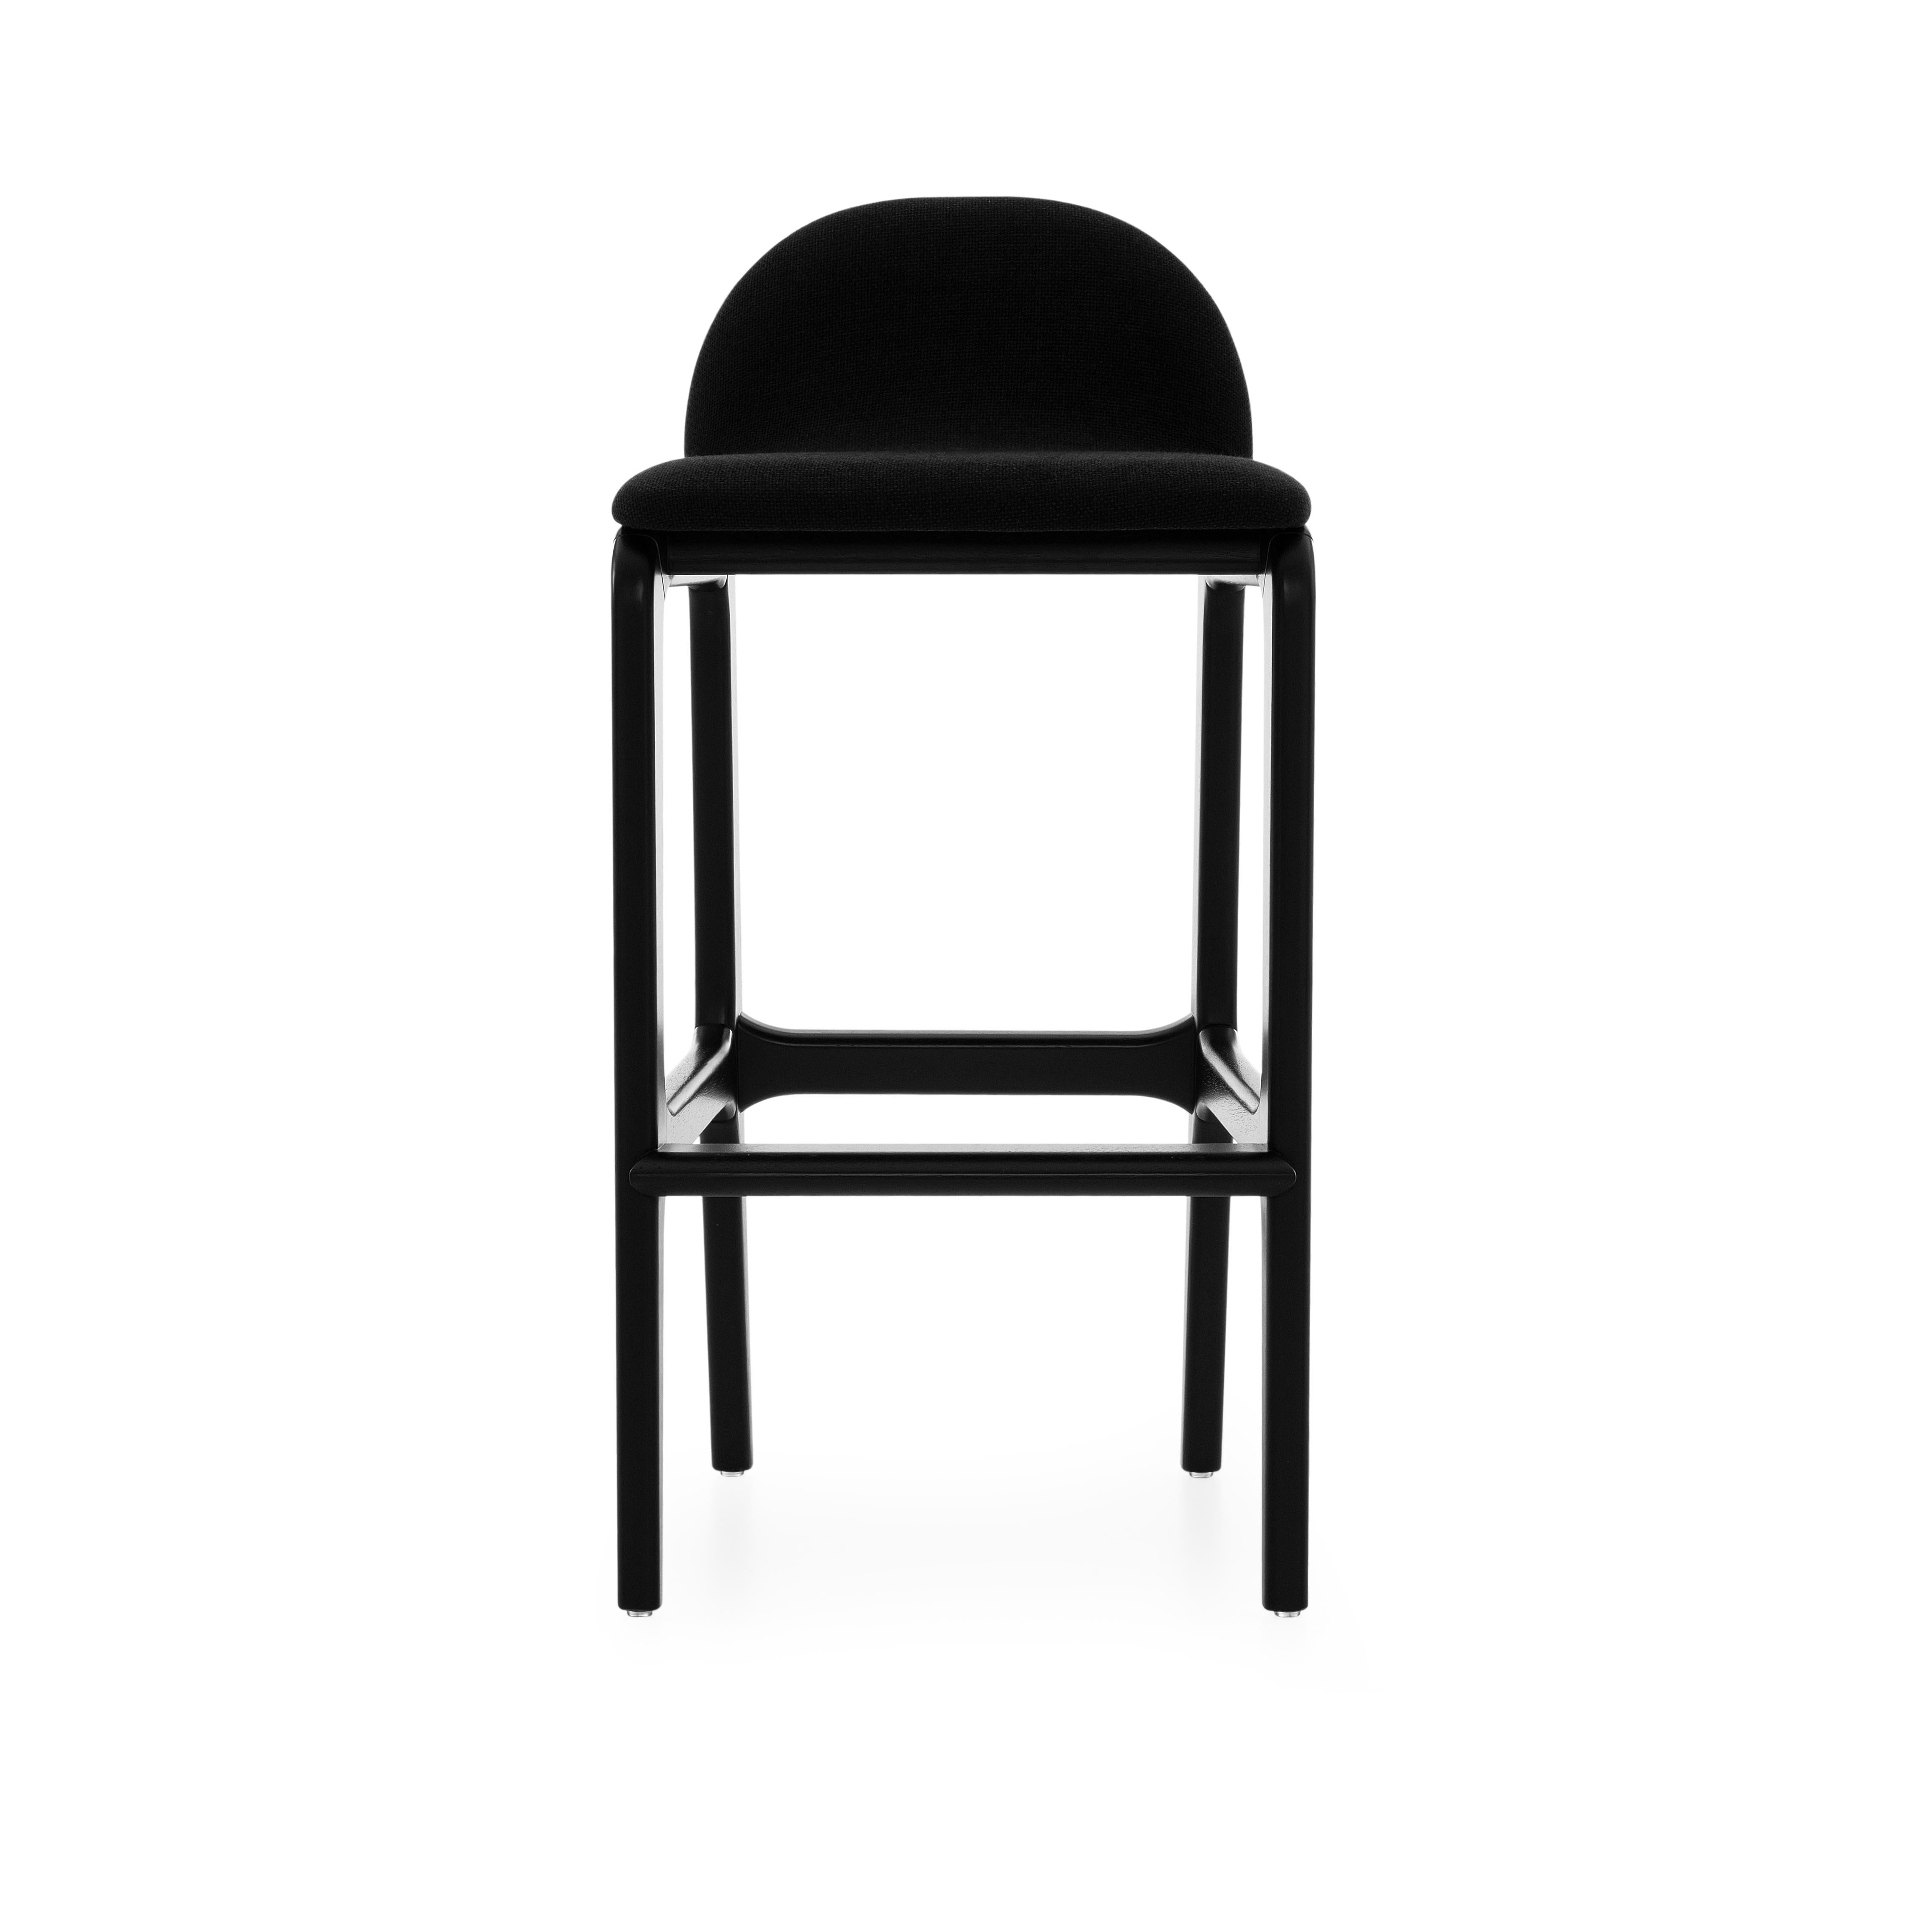 Ura Bar Stool in Black Wood Finish Base and Upholstered Black Seat In New Condition For Sale In Miami, FL